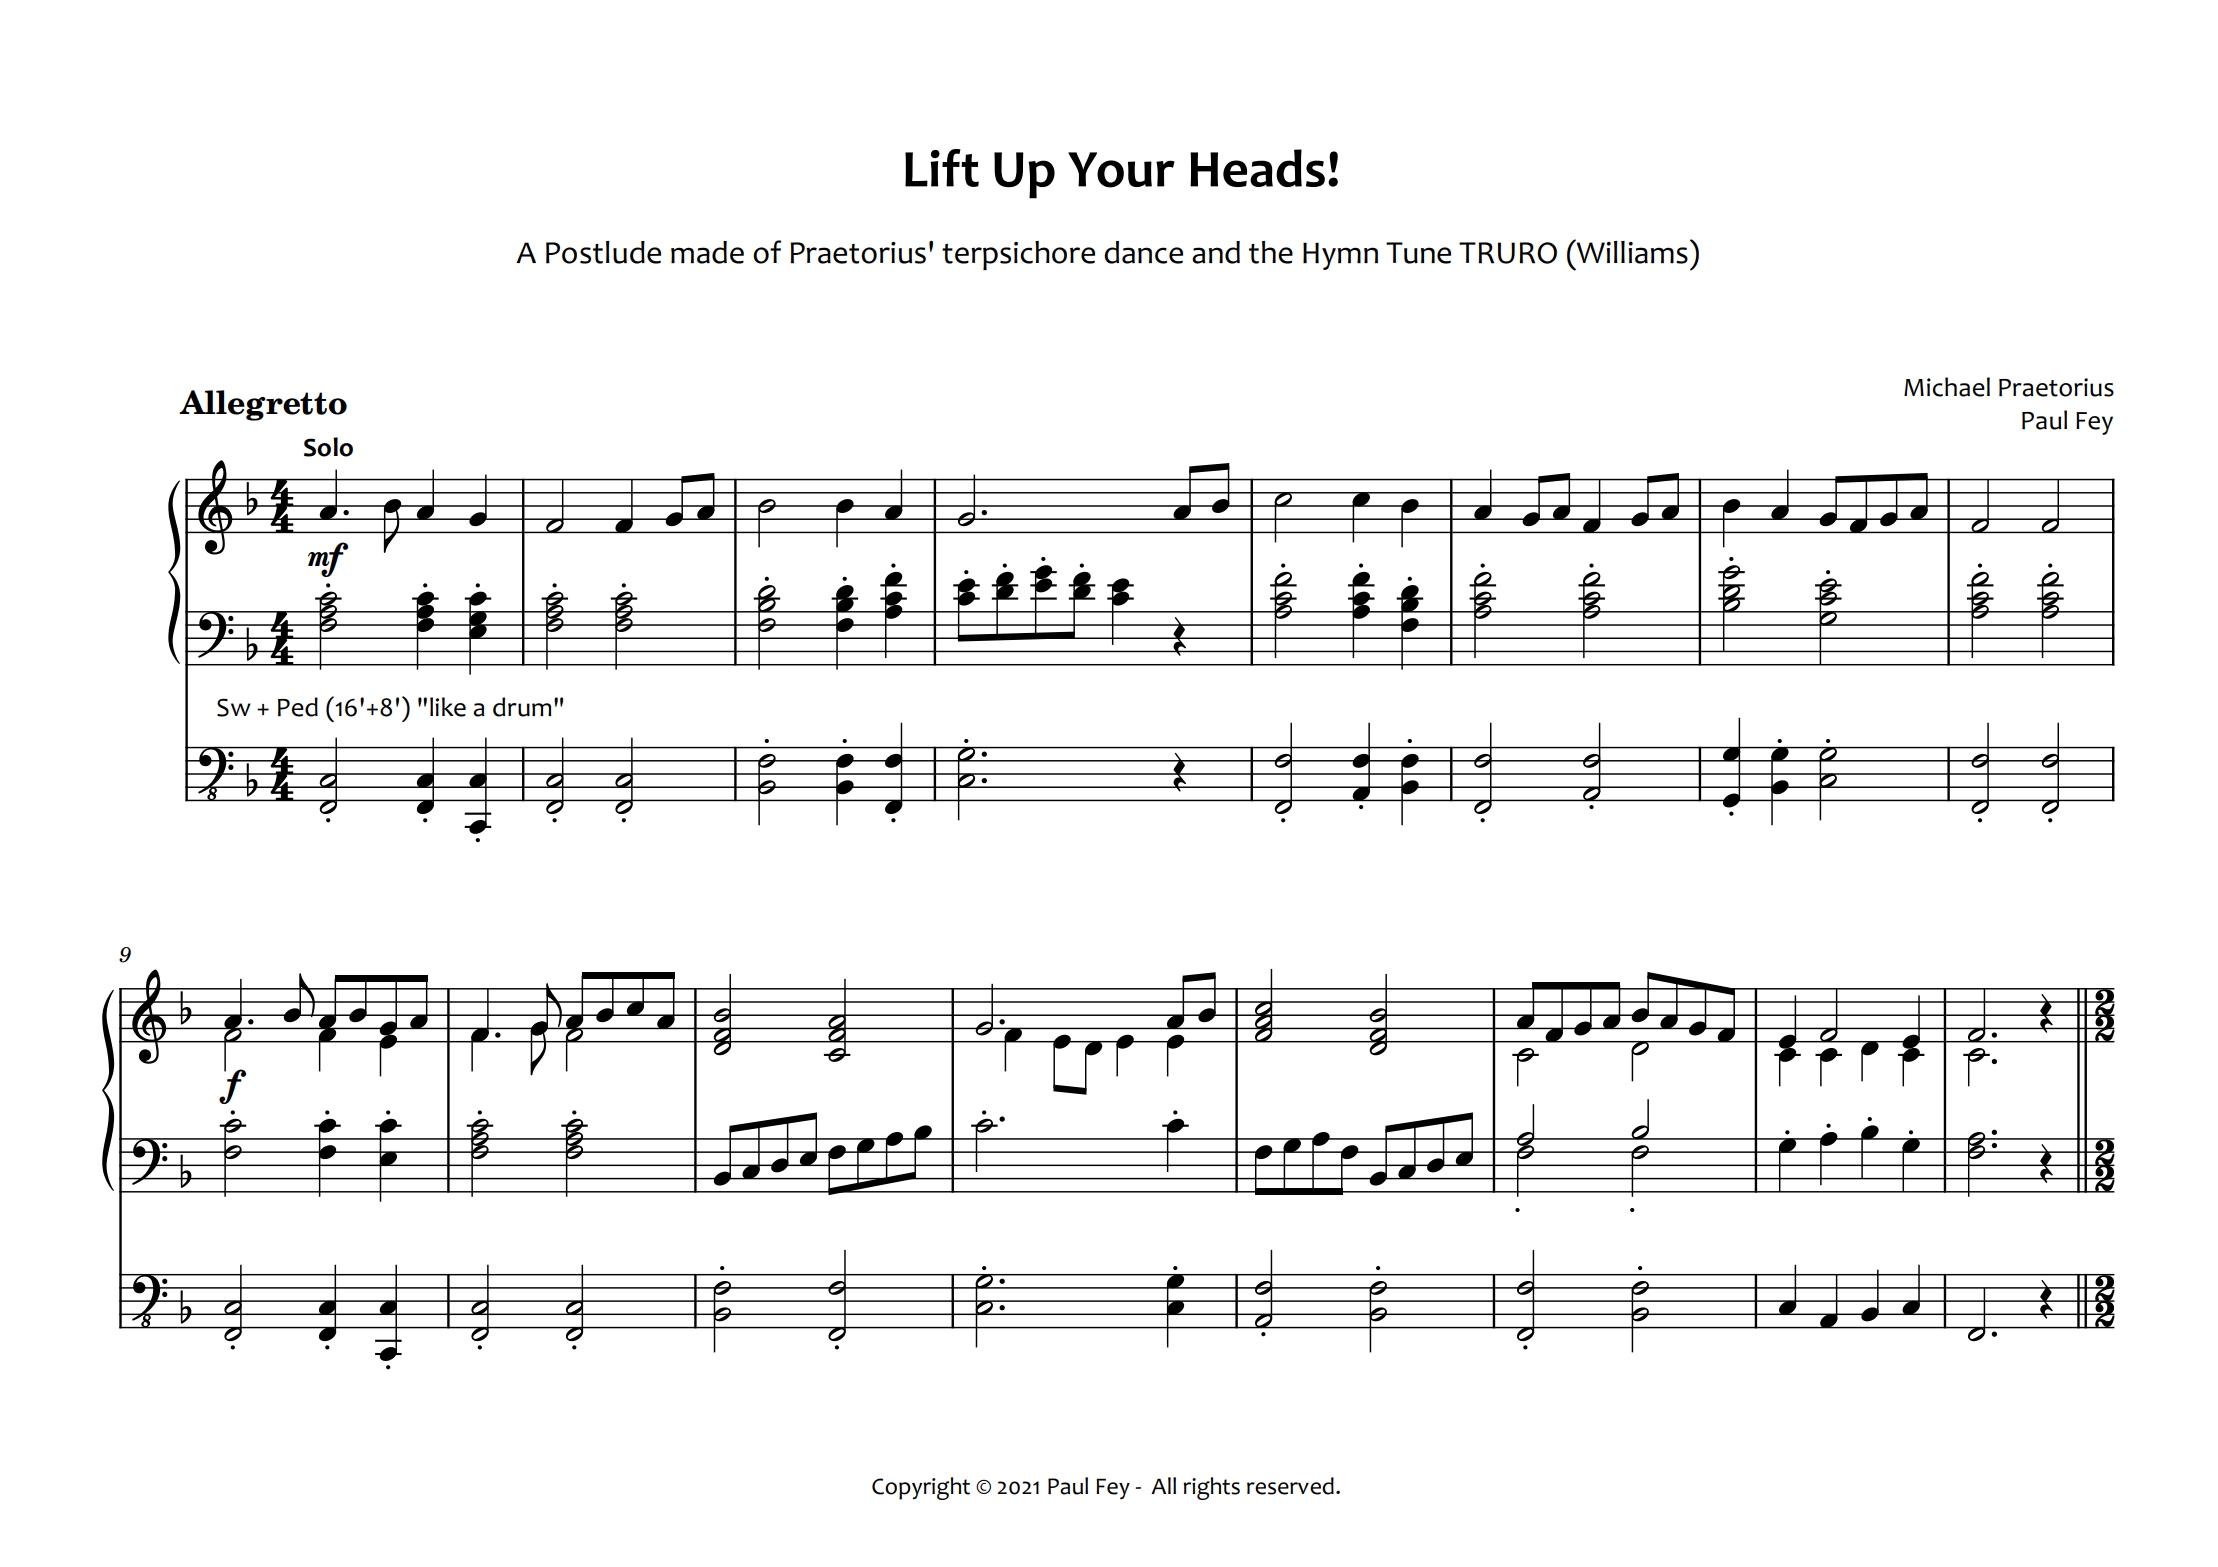 Lift up your Heads" - Advent Postlude (Sheet Music) - Music for Pipe Organ by Paul Fey